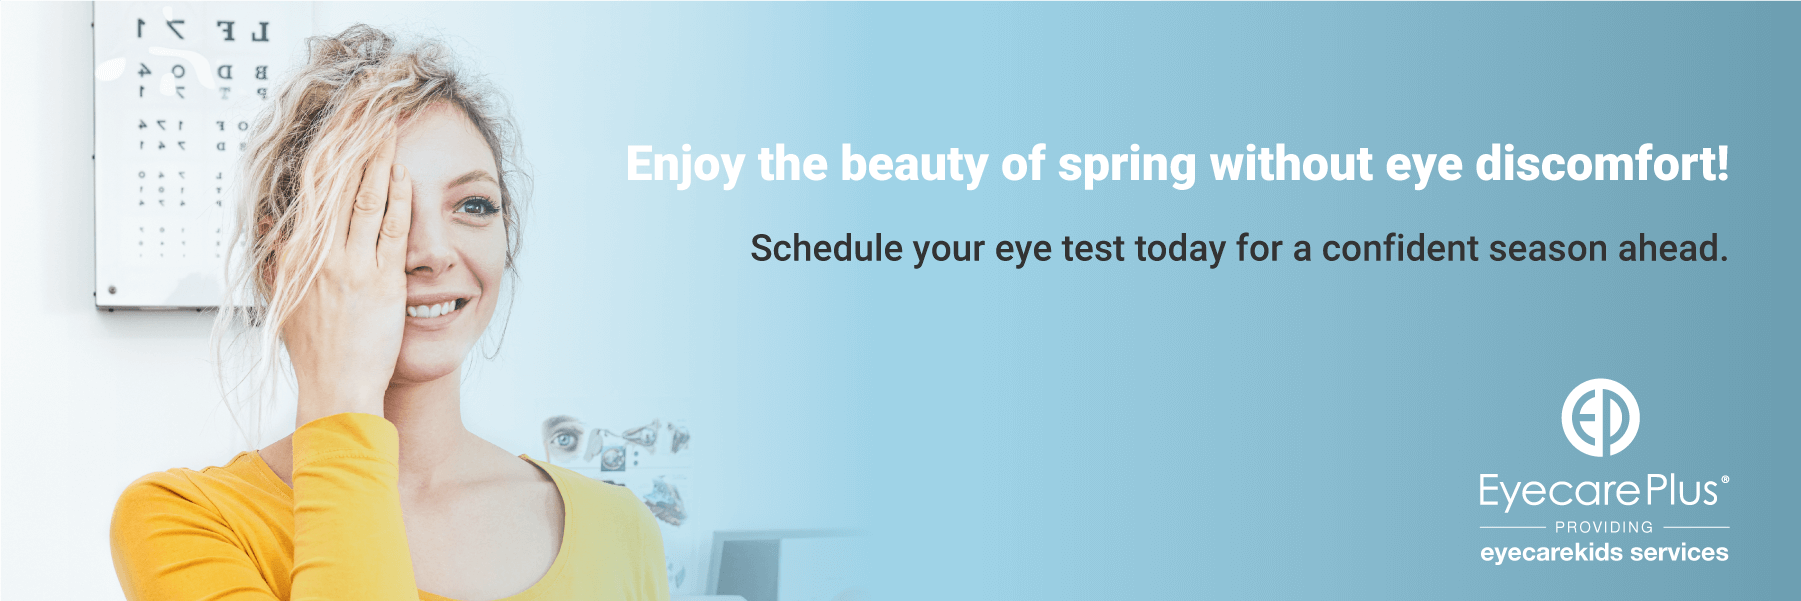 Enjoy the beauty of spring without eye discomfort!